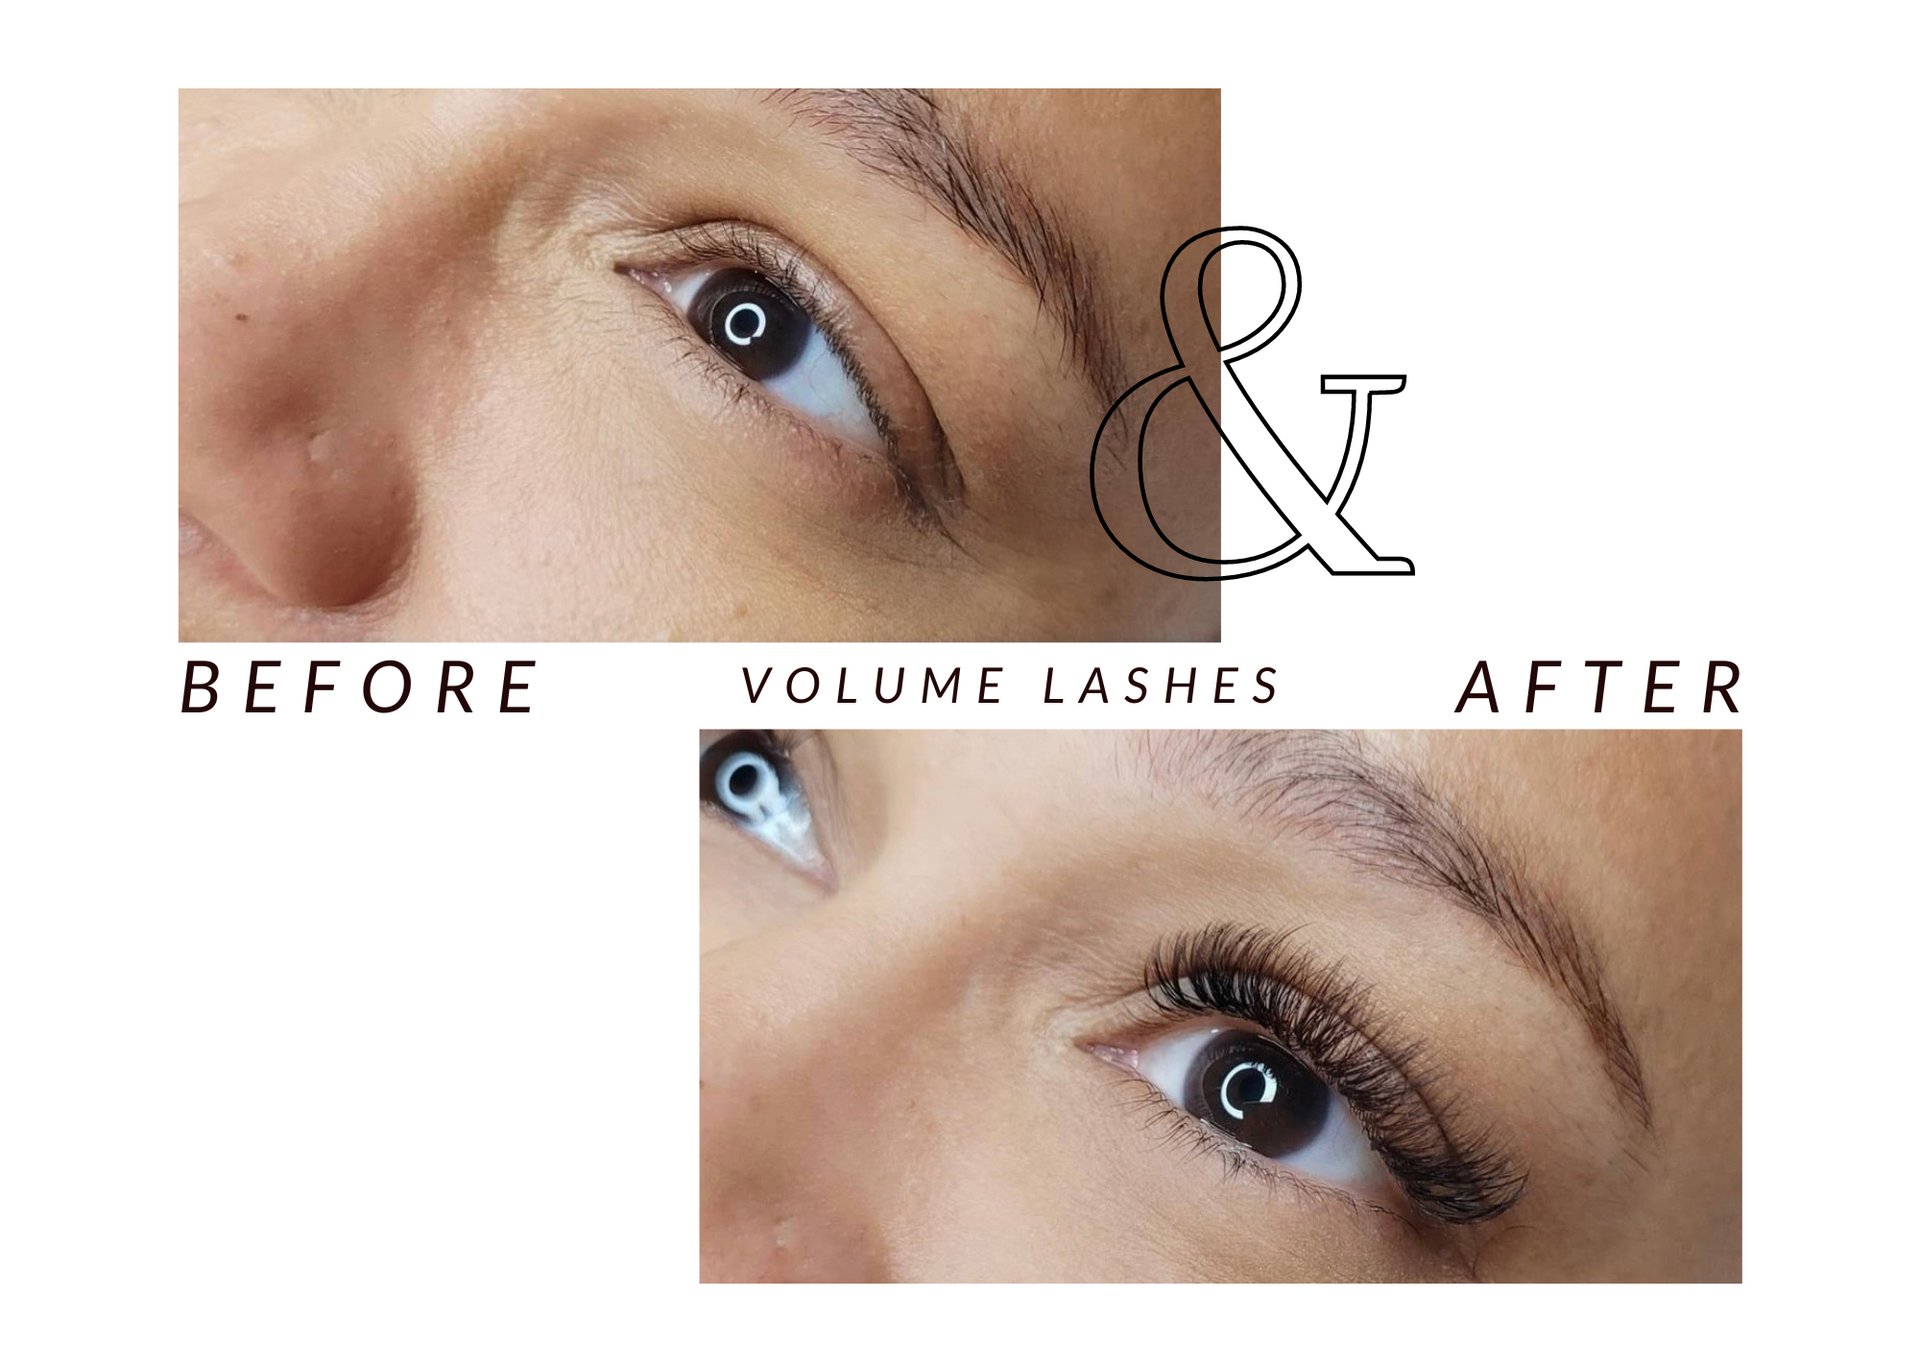 A before and after picture of a woman 's eye with volume lashes